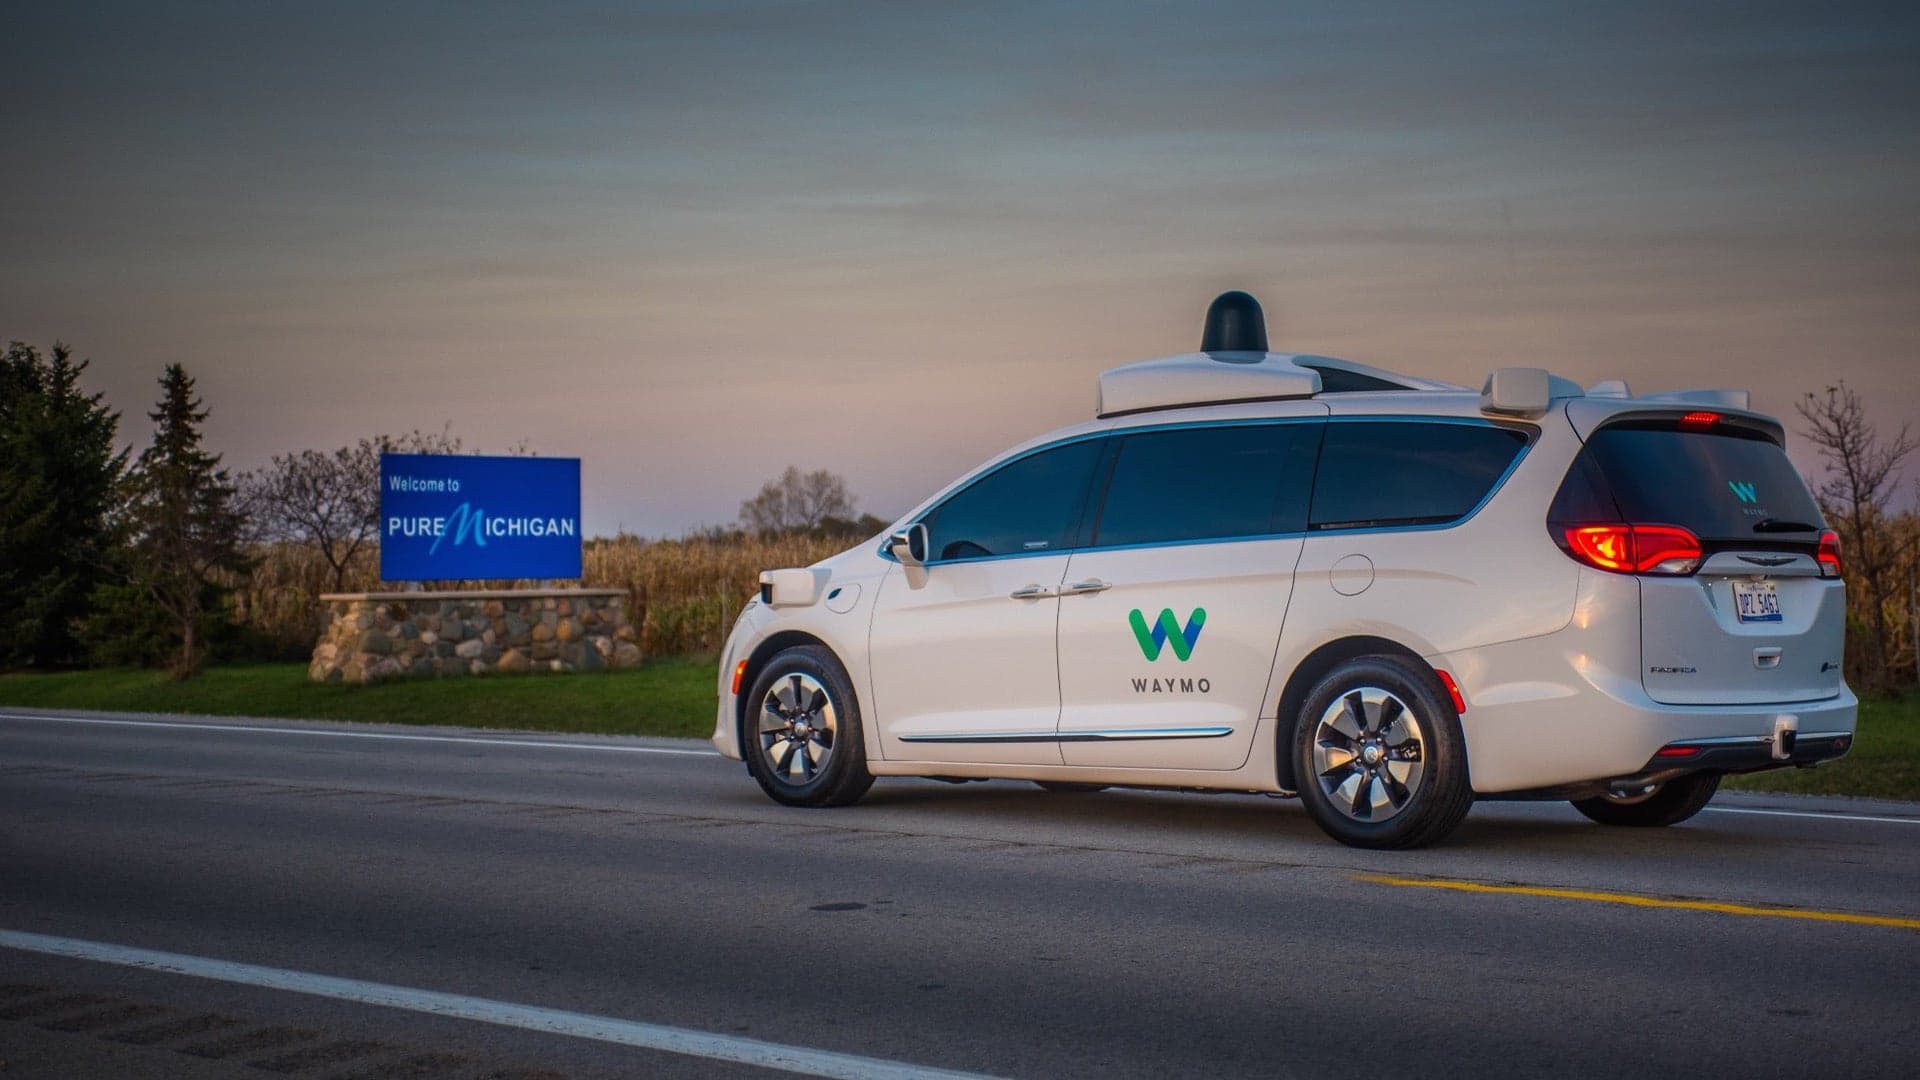 Consumers Have Become More Apprehensive About Self-Driving Cars, Study Says